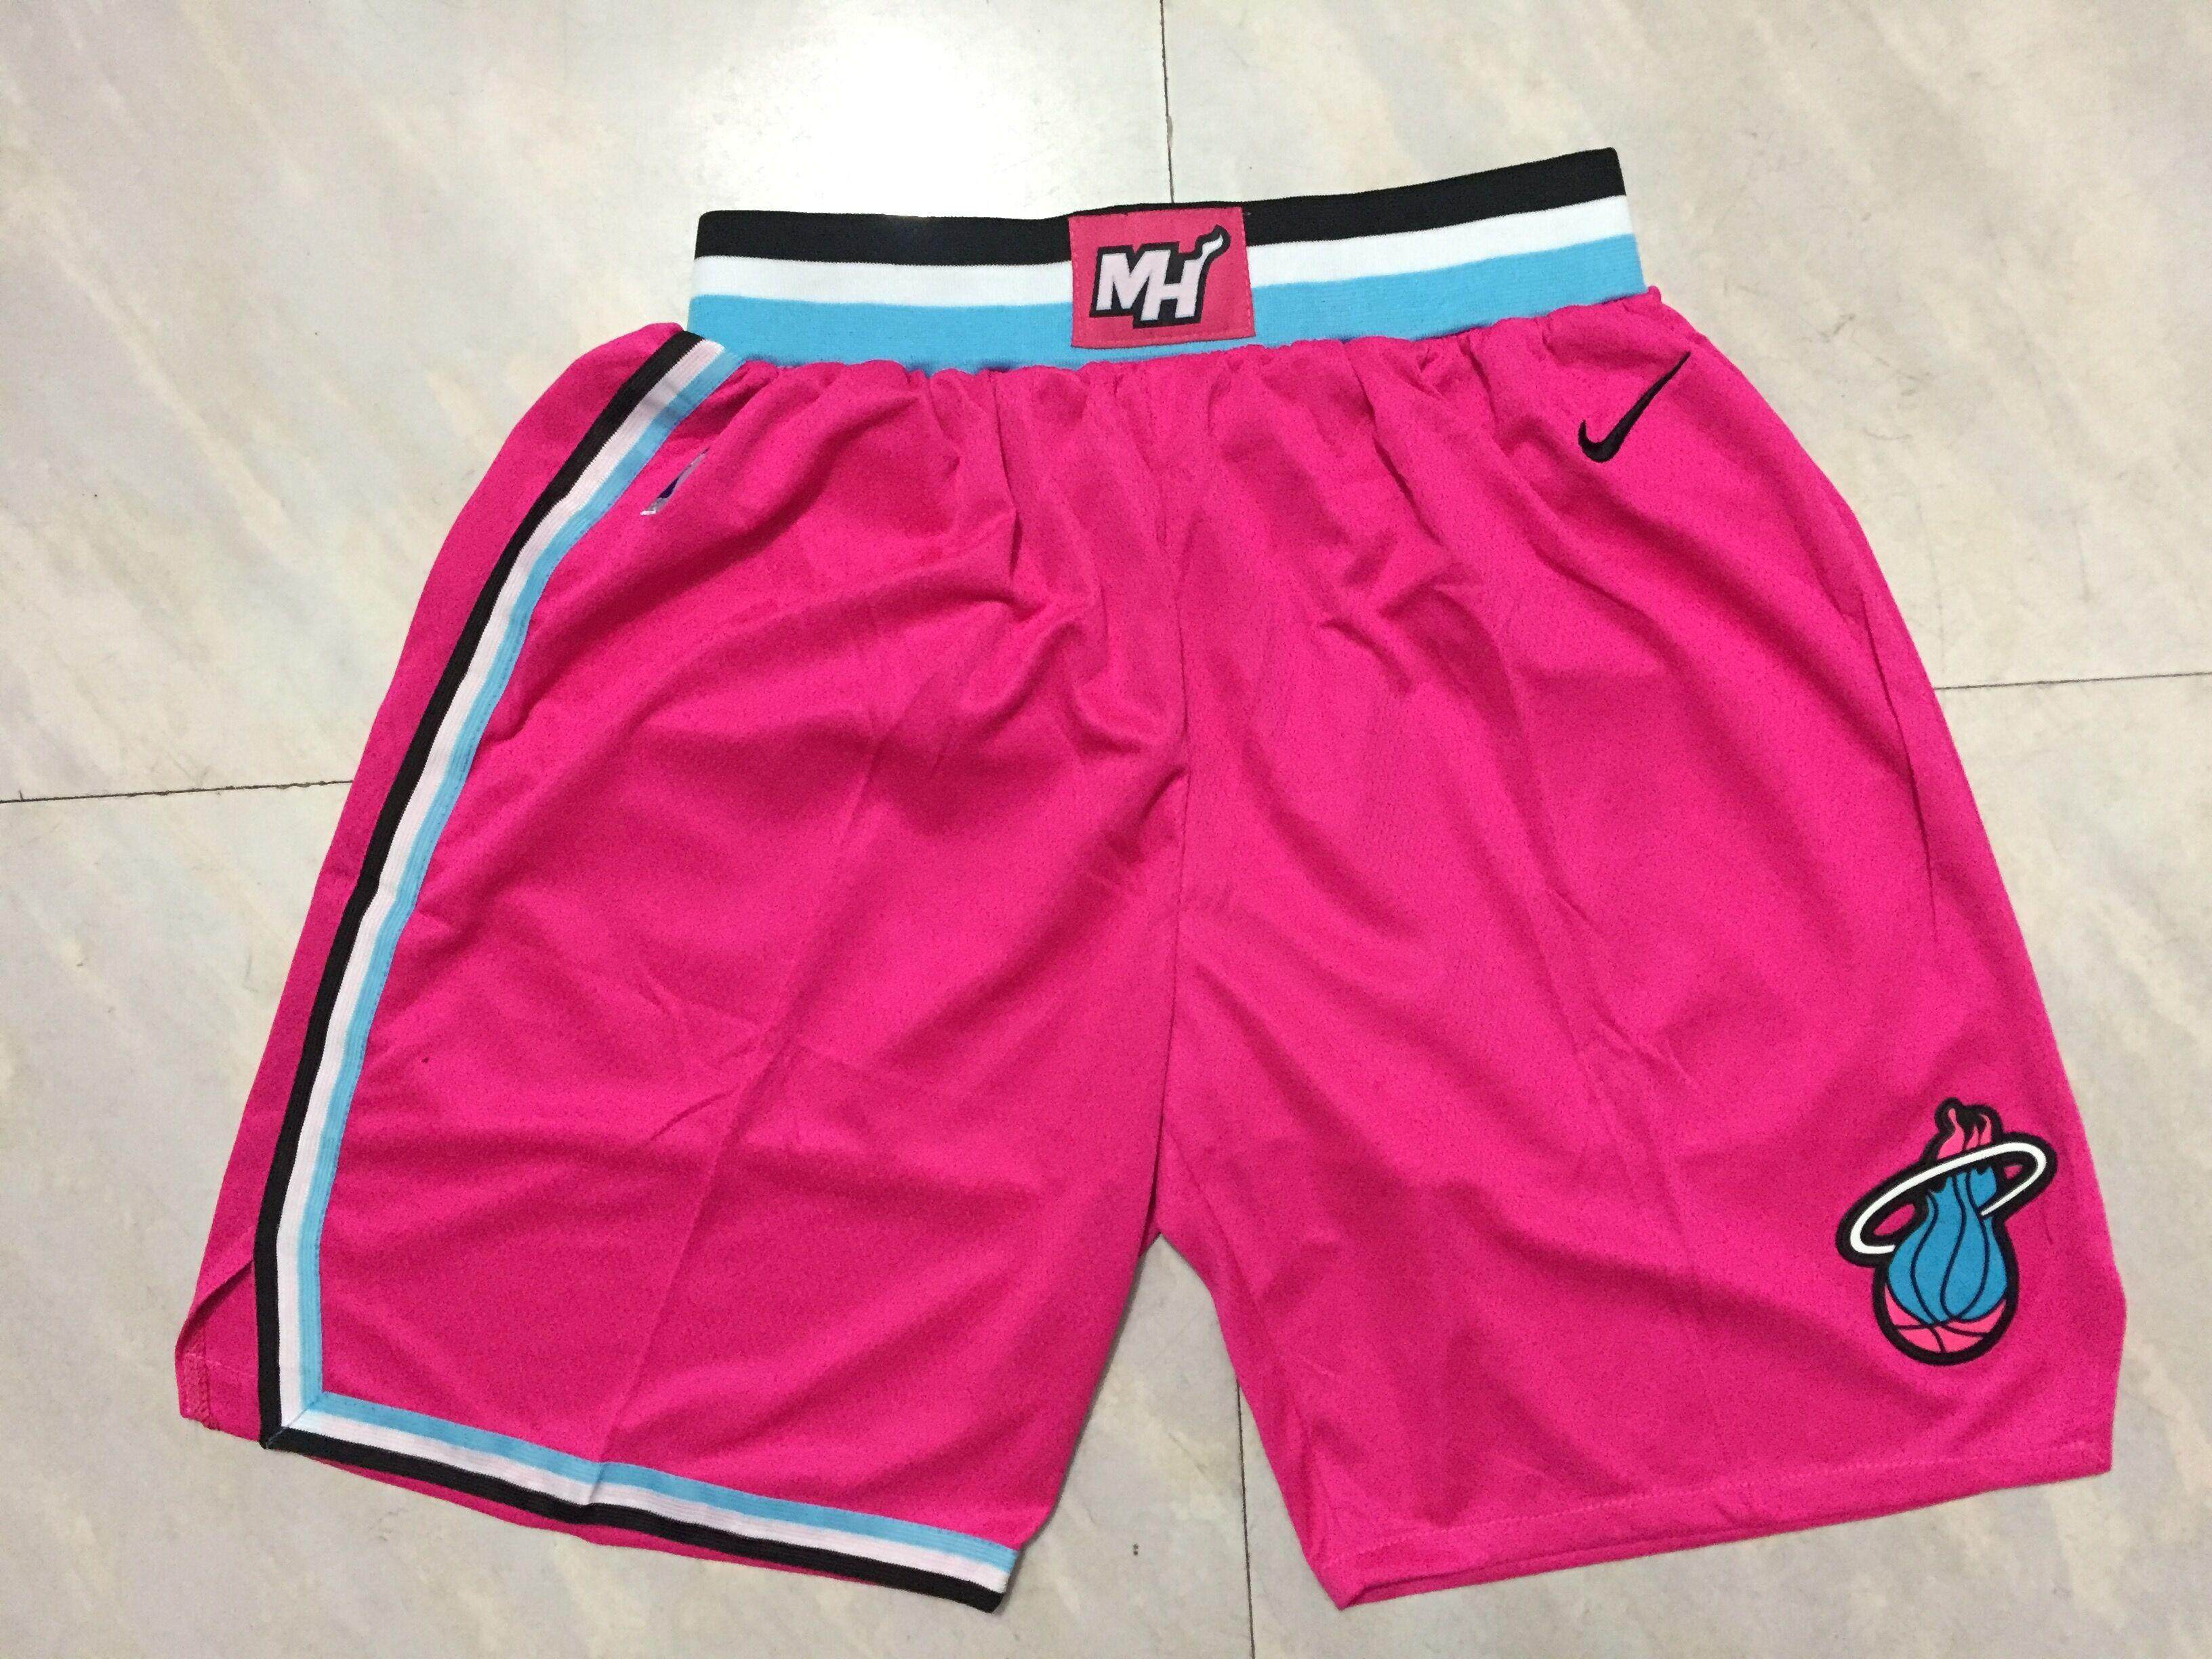 black and pink miami heat jersey